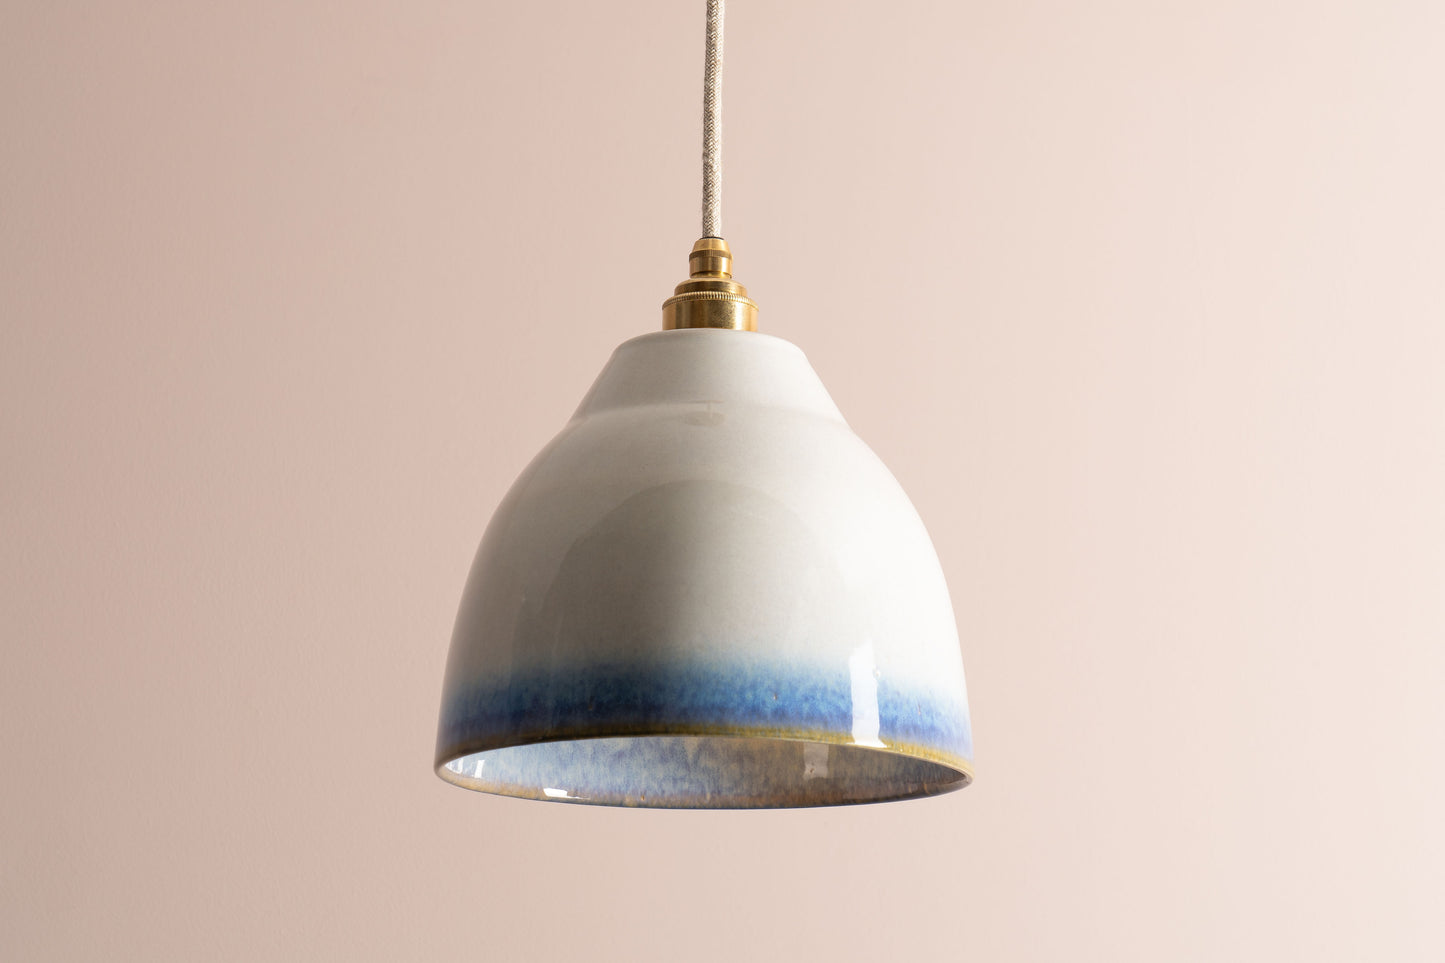 Element Pendant Light in Ceramic and Brass/Nickel [OUTLET]